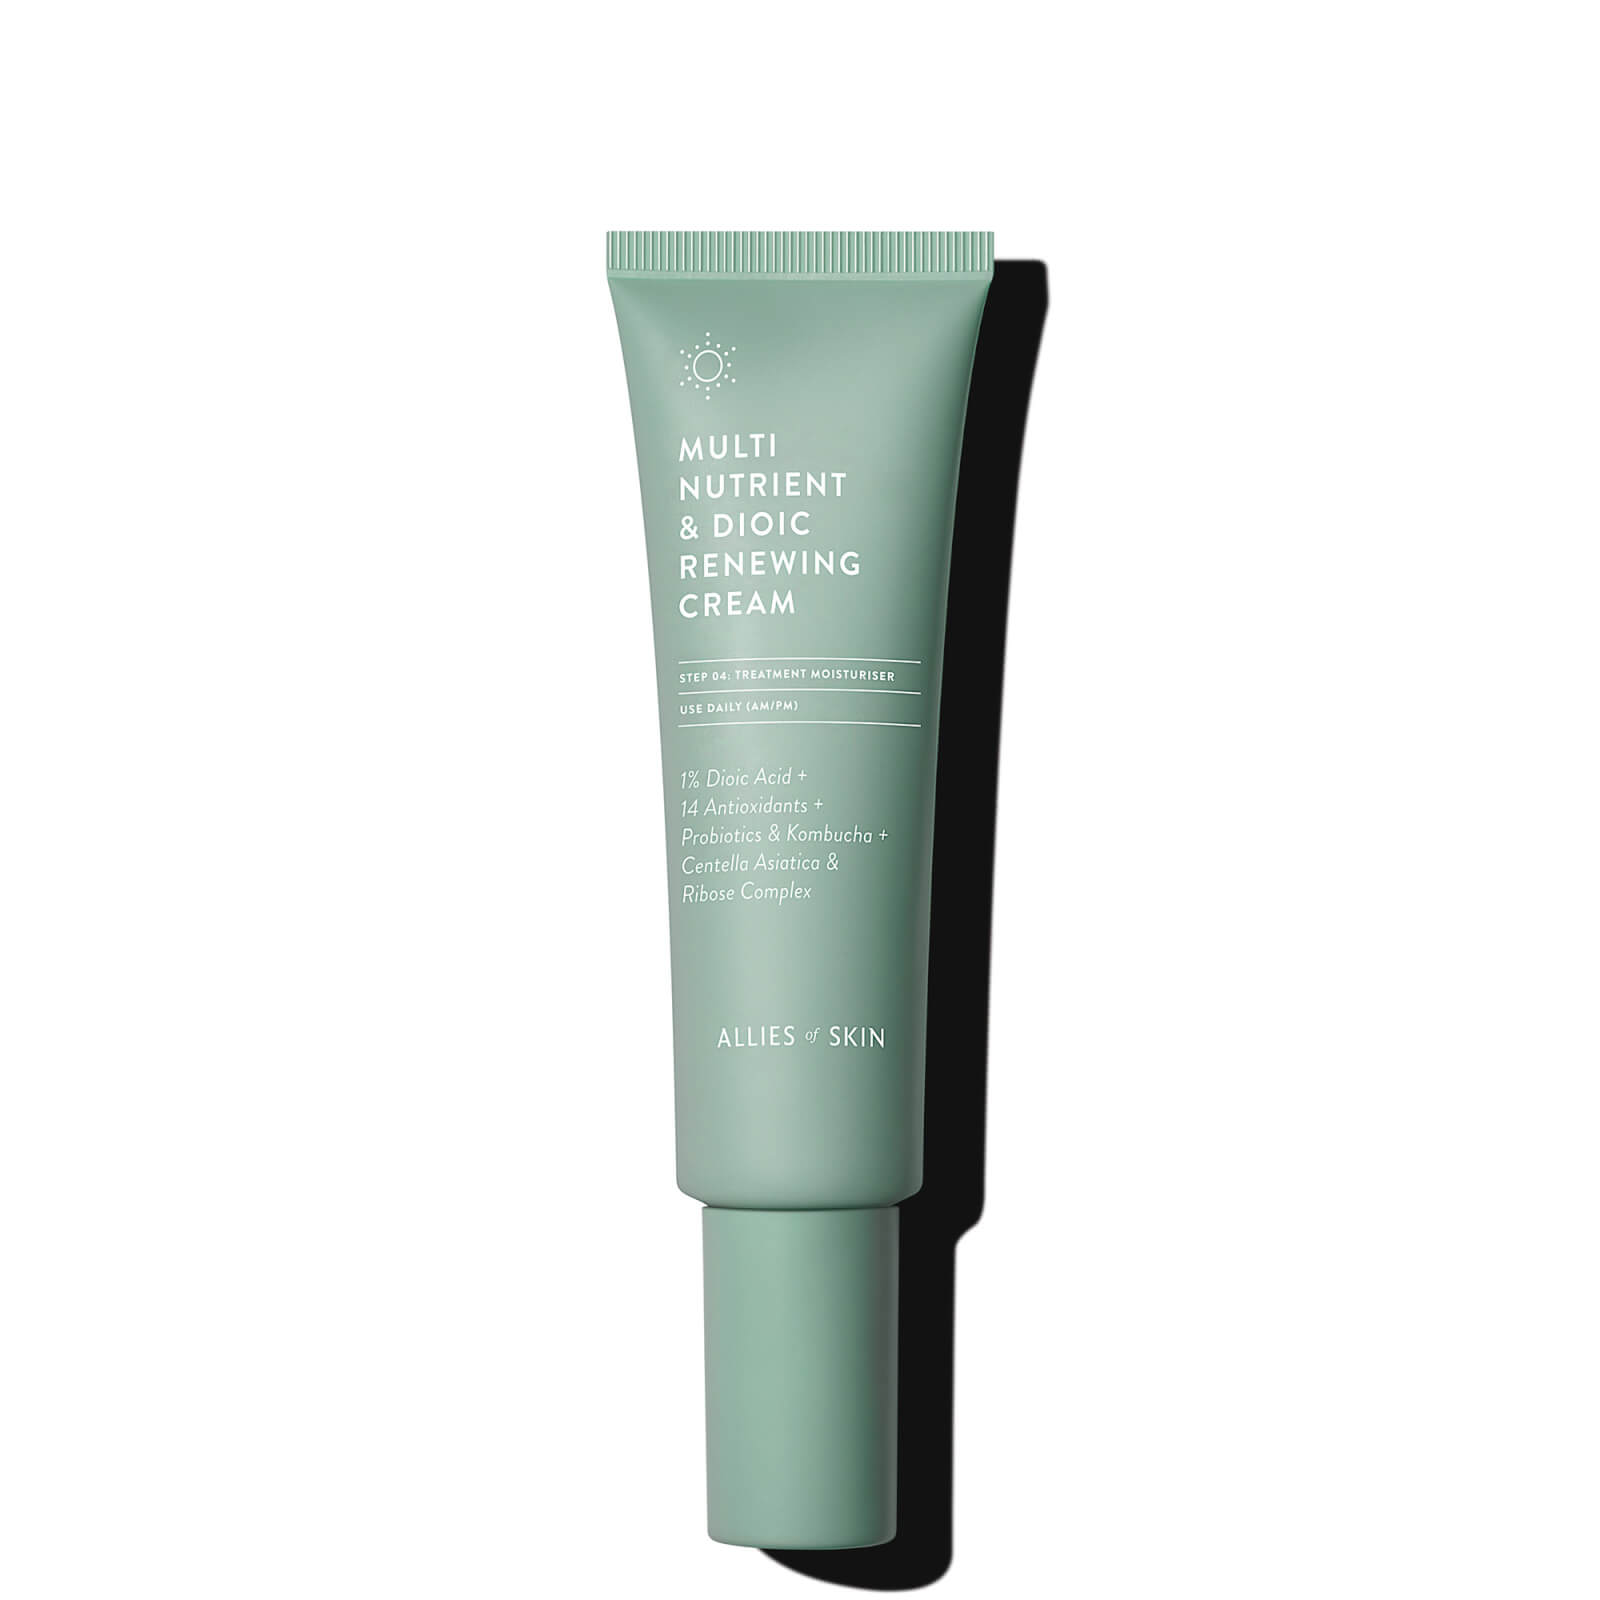 Image of Allies of Skin Multi Nutrient and Dioic Renewing Cream 50ml